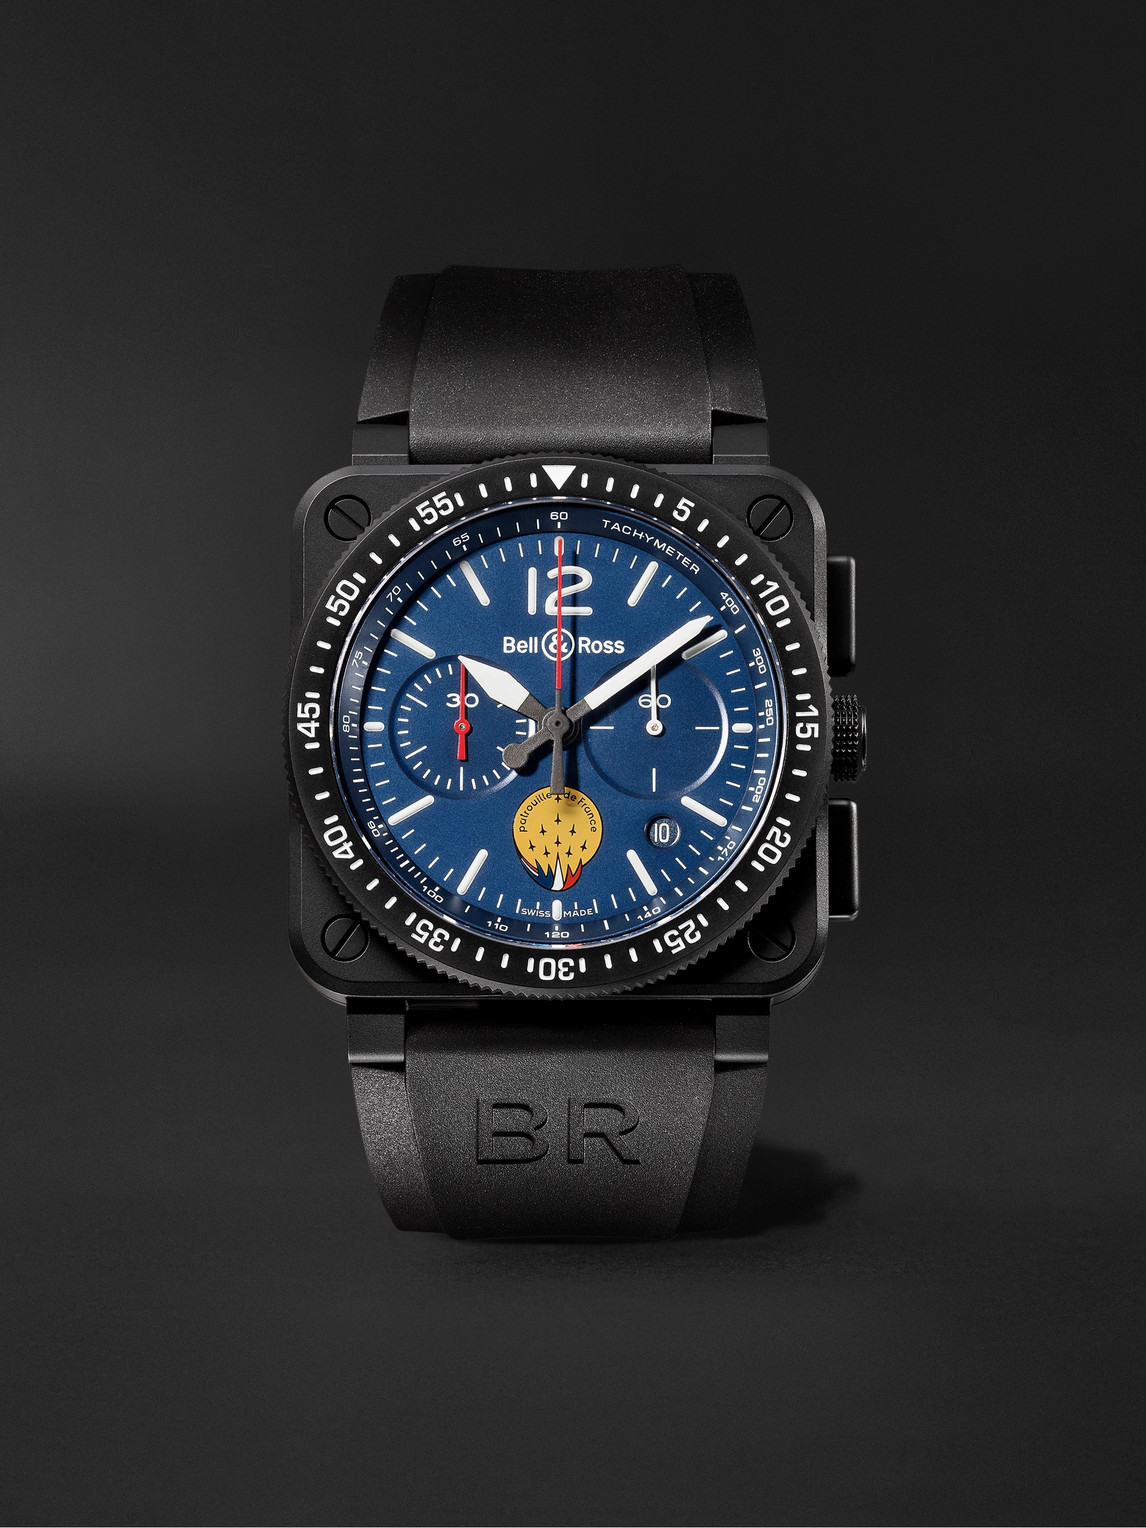 BR 03-94 PA94 Patrouille de France Limited Edition Chronograph Ceramic and Rubber Watch, Ref. No. BR0394-PAF1-CE/SRB